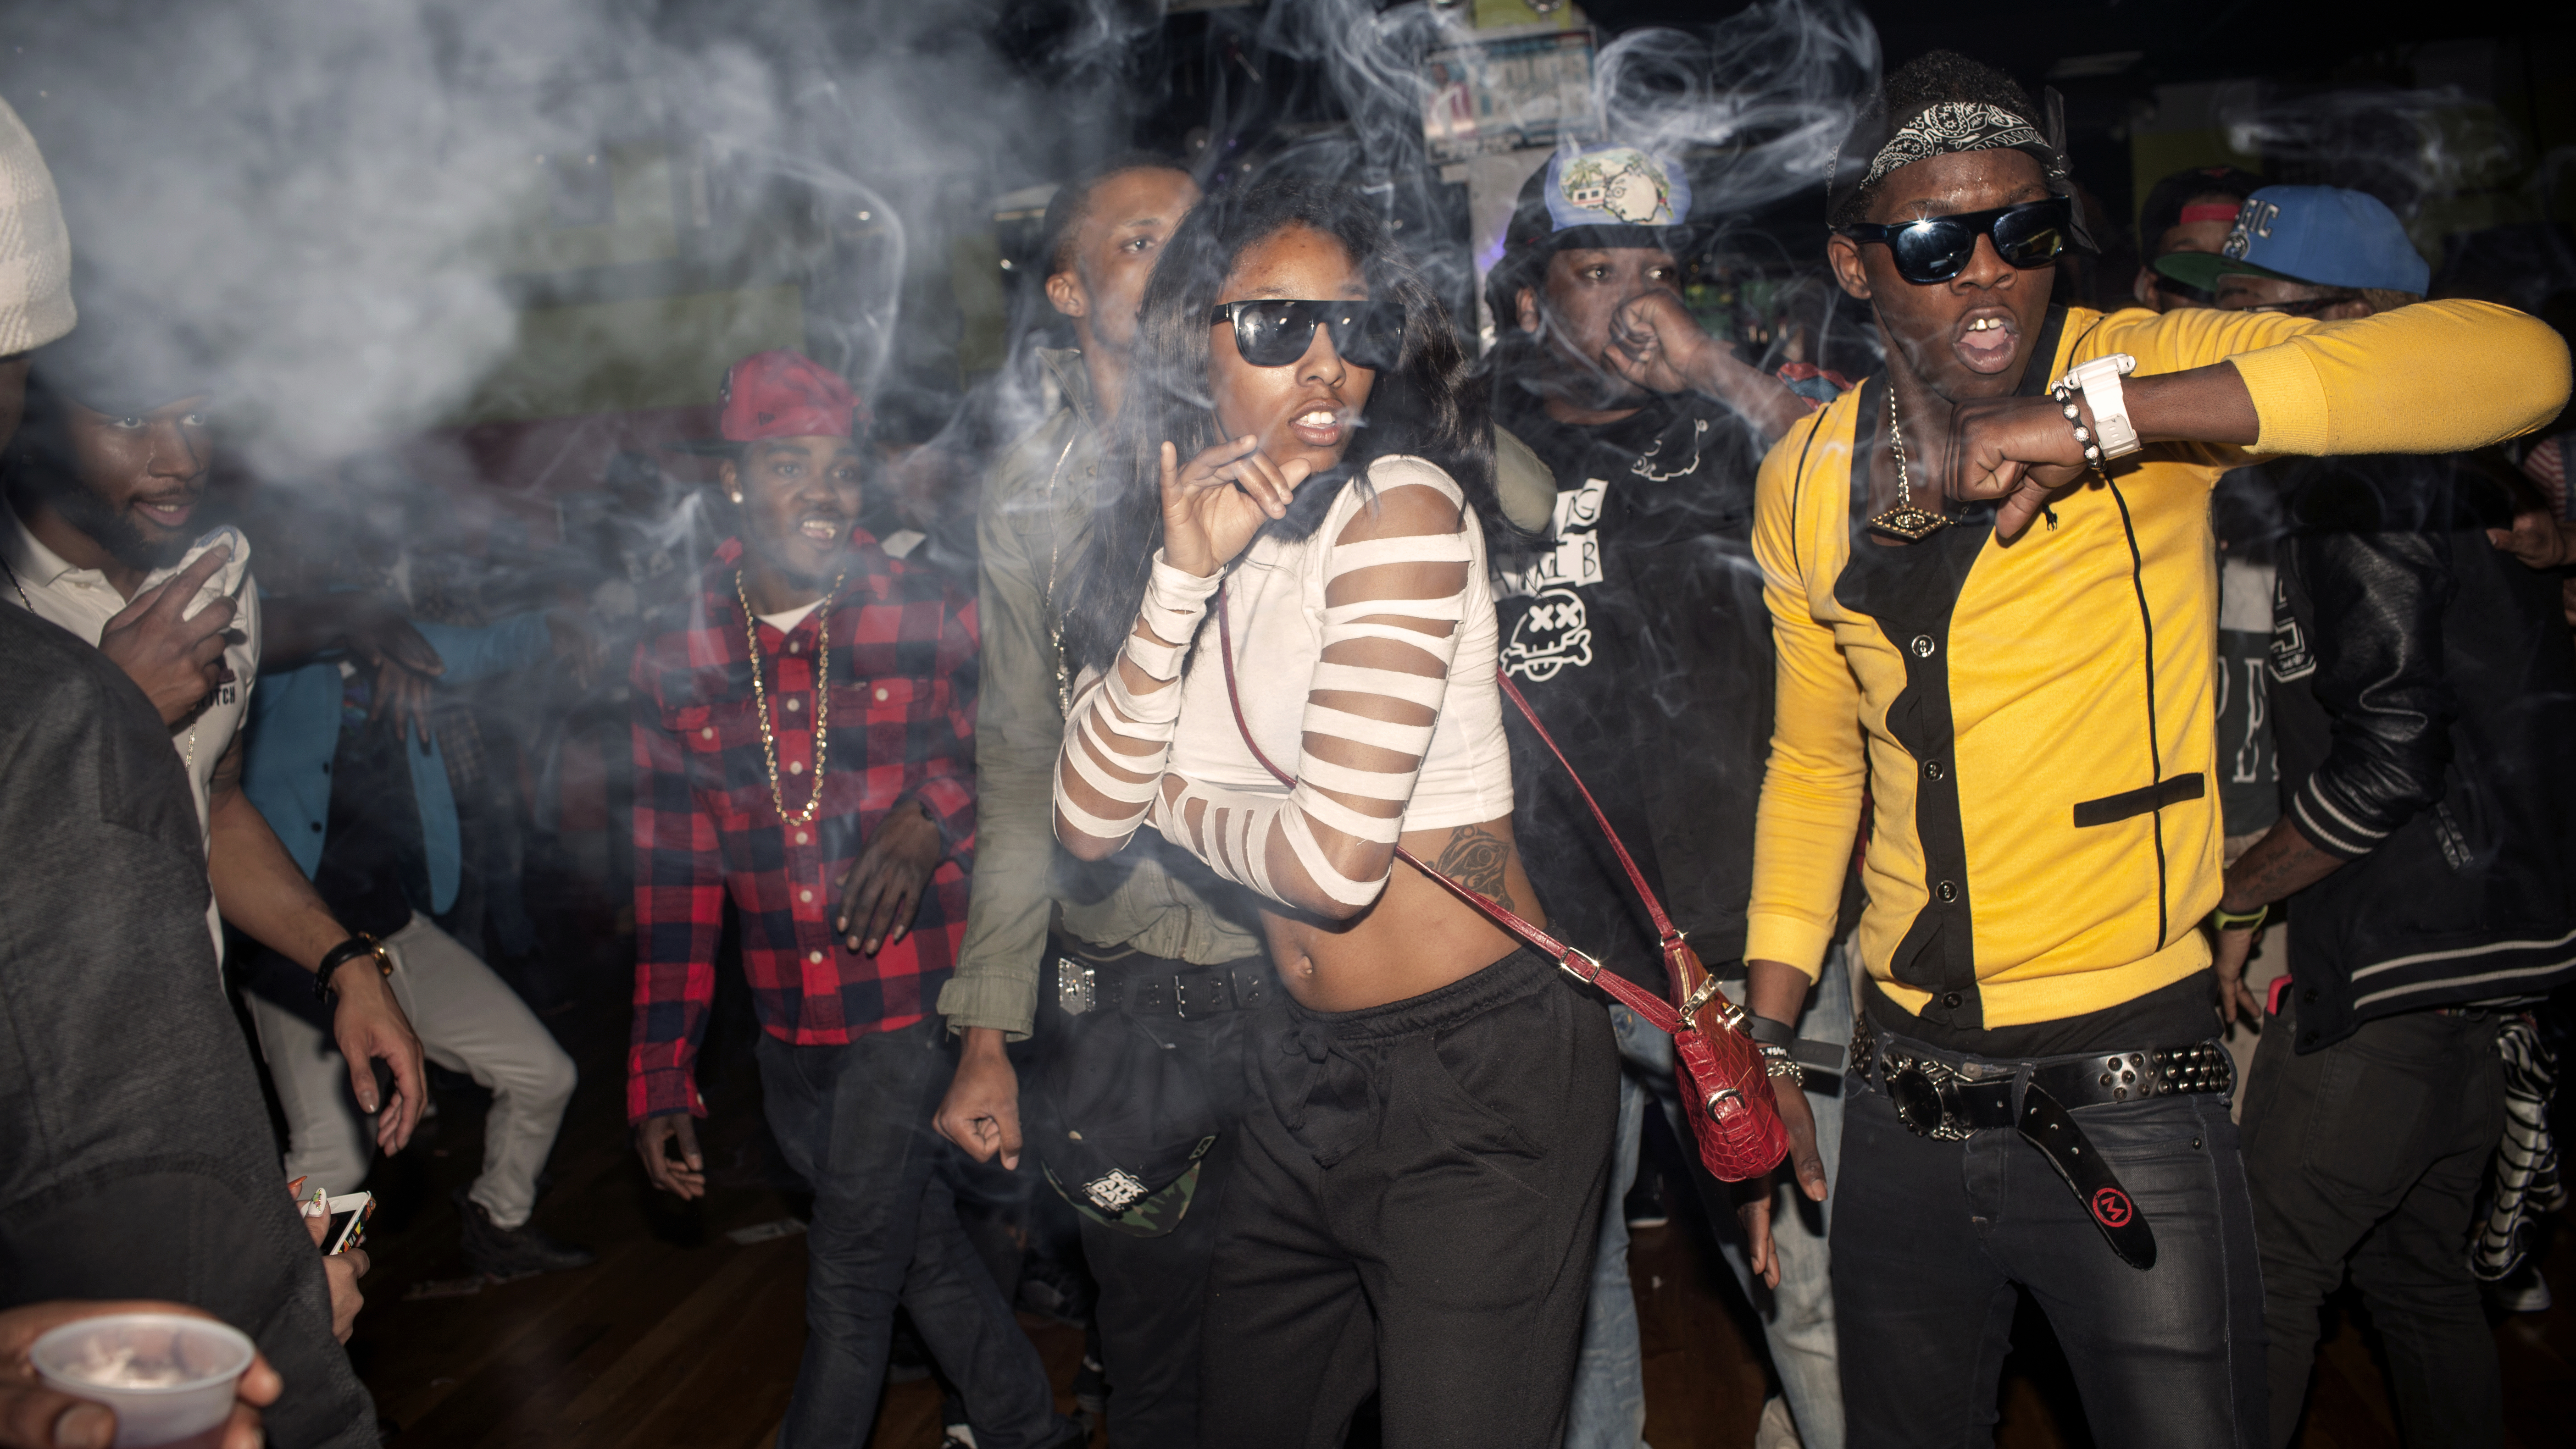 The Flavor Essence dance team moves through its choreography in unison as smoke clouds the air in a nightclub around 3am on a Thursday night. Videographers often attend the parties to make video of the dancers, which will be published on the internet on v